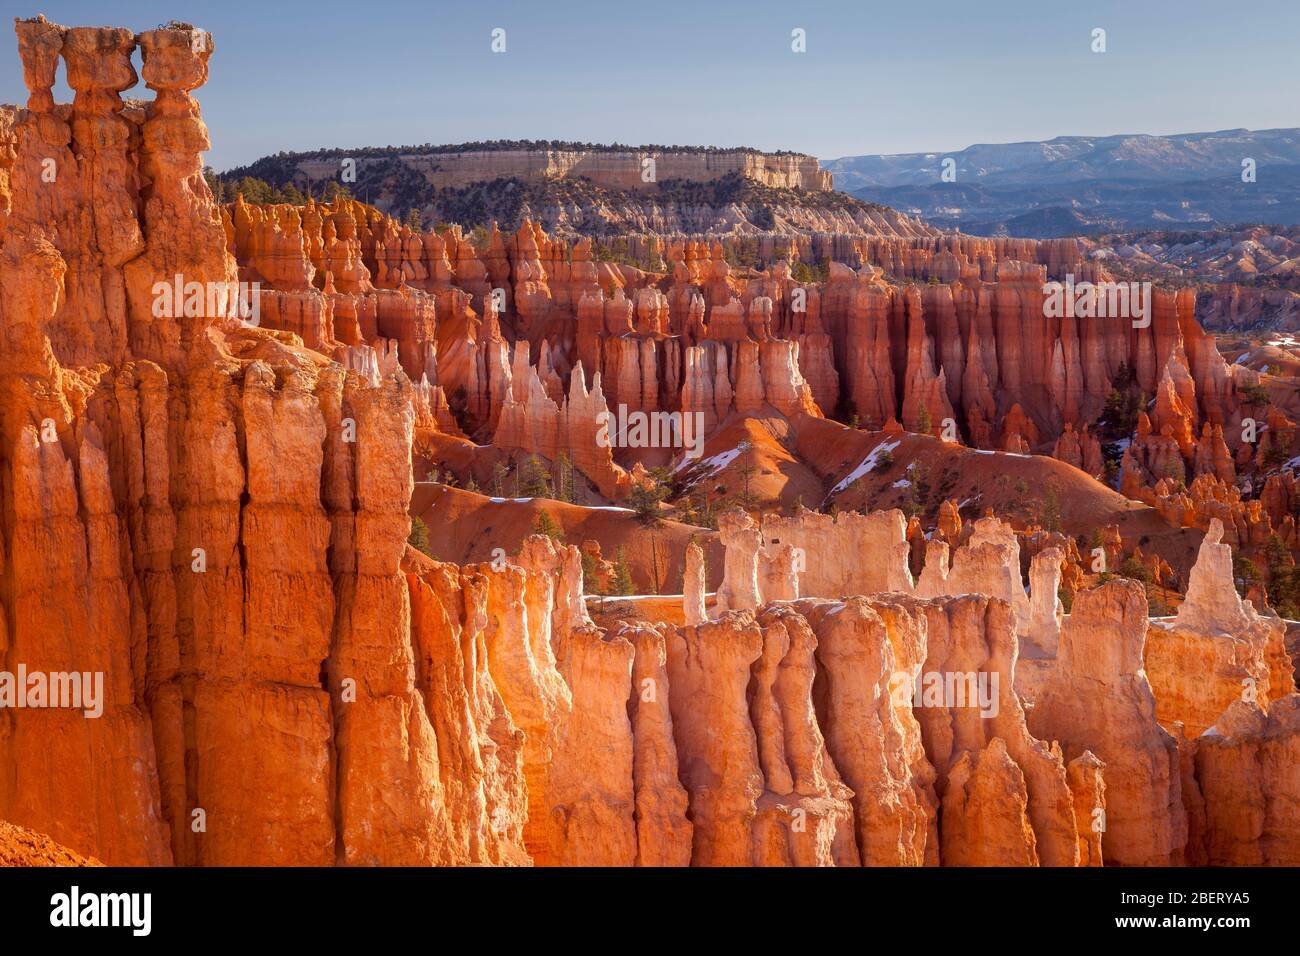 Hoodoos - rock formations in the Amphitheater of Bryce Canyon National Park from Sunset Point, Utah USA Stock Photo